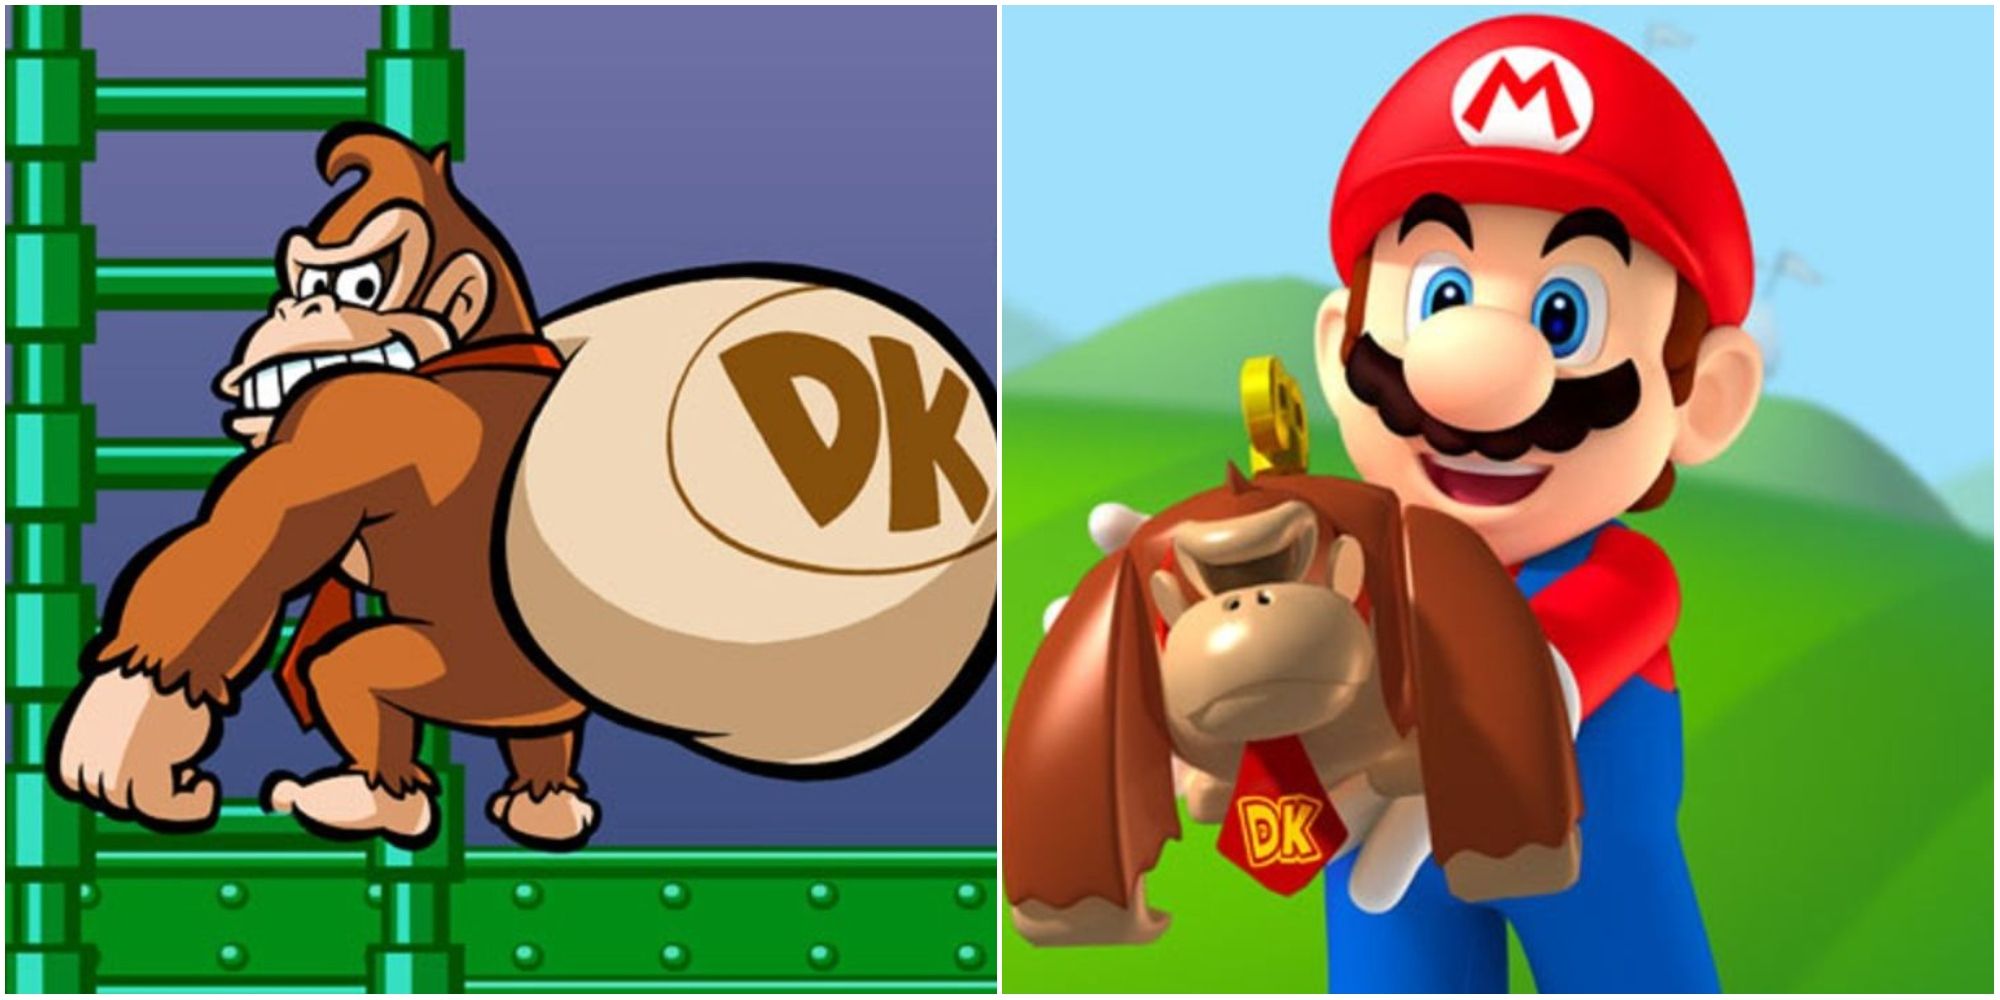 Donkey Kong with a sack of toys and Mario holding a DK wind-up toy